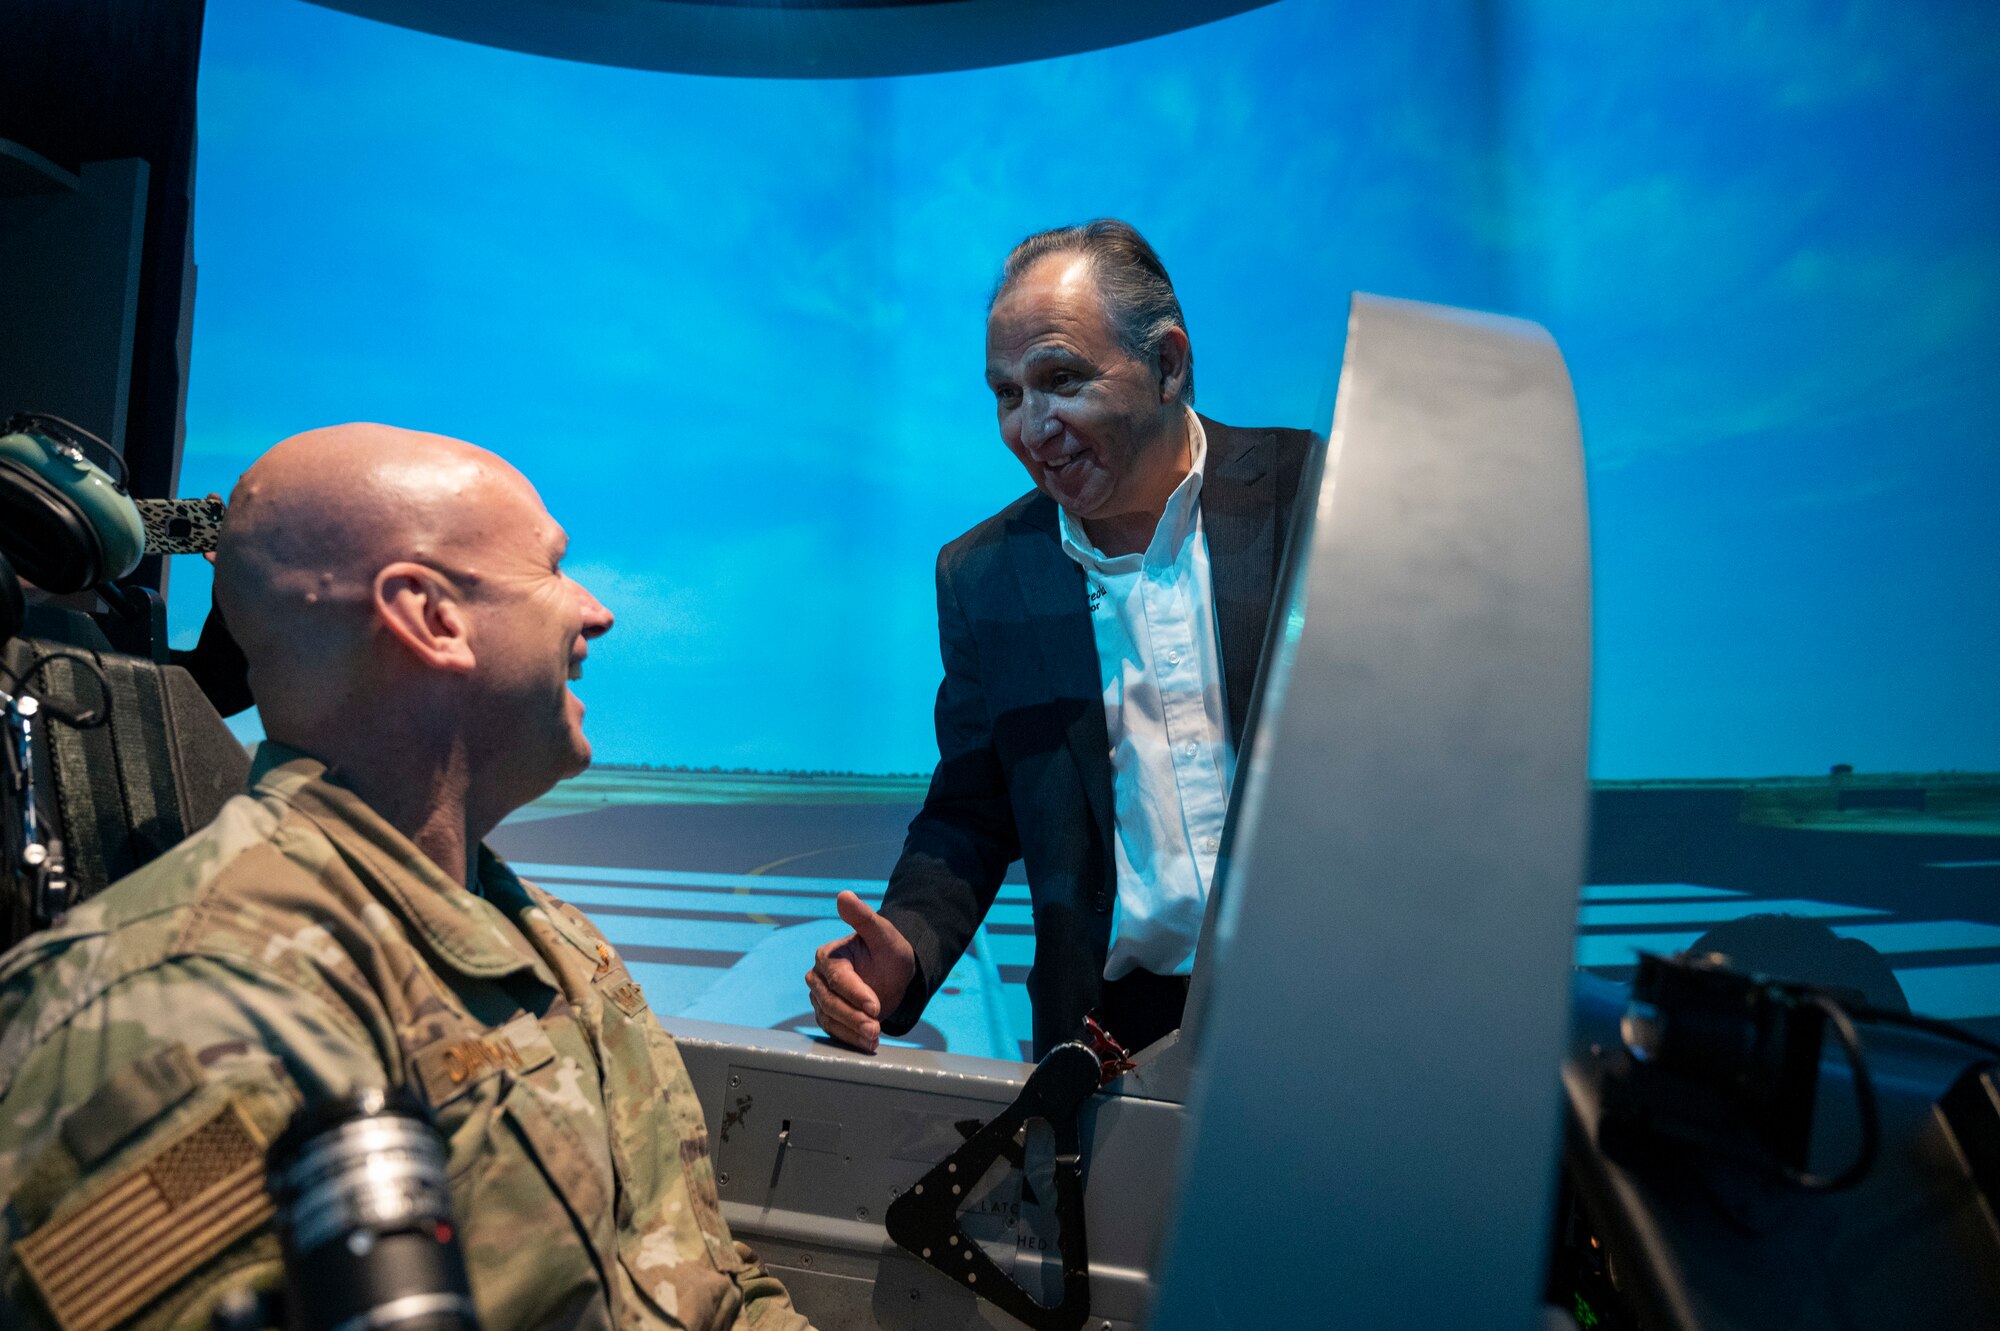 U.S. Air Force Col. Kevin Davidson (left), 47th Flying Training Wing commander, sits in the cockpit of a T-6A Texan II simulator while Al Arreola, Mayor of Del Rio, Texas, jokes about giving flying advice at Laughlin Air Force Base, Texas, Nov. 1, 2022. Laughlin’s mission is to develop U.S. Air Force pilots and the base relies on support from the local community to make that mission a success. Familiarization tours cultivate understating of the wing’s mission and help forge lasting partnerships in the community.  (U.S. Air Force photo by Senior Airman Nicholas Larsen)